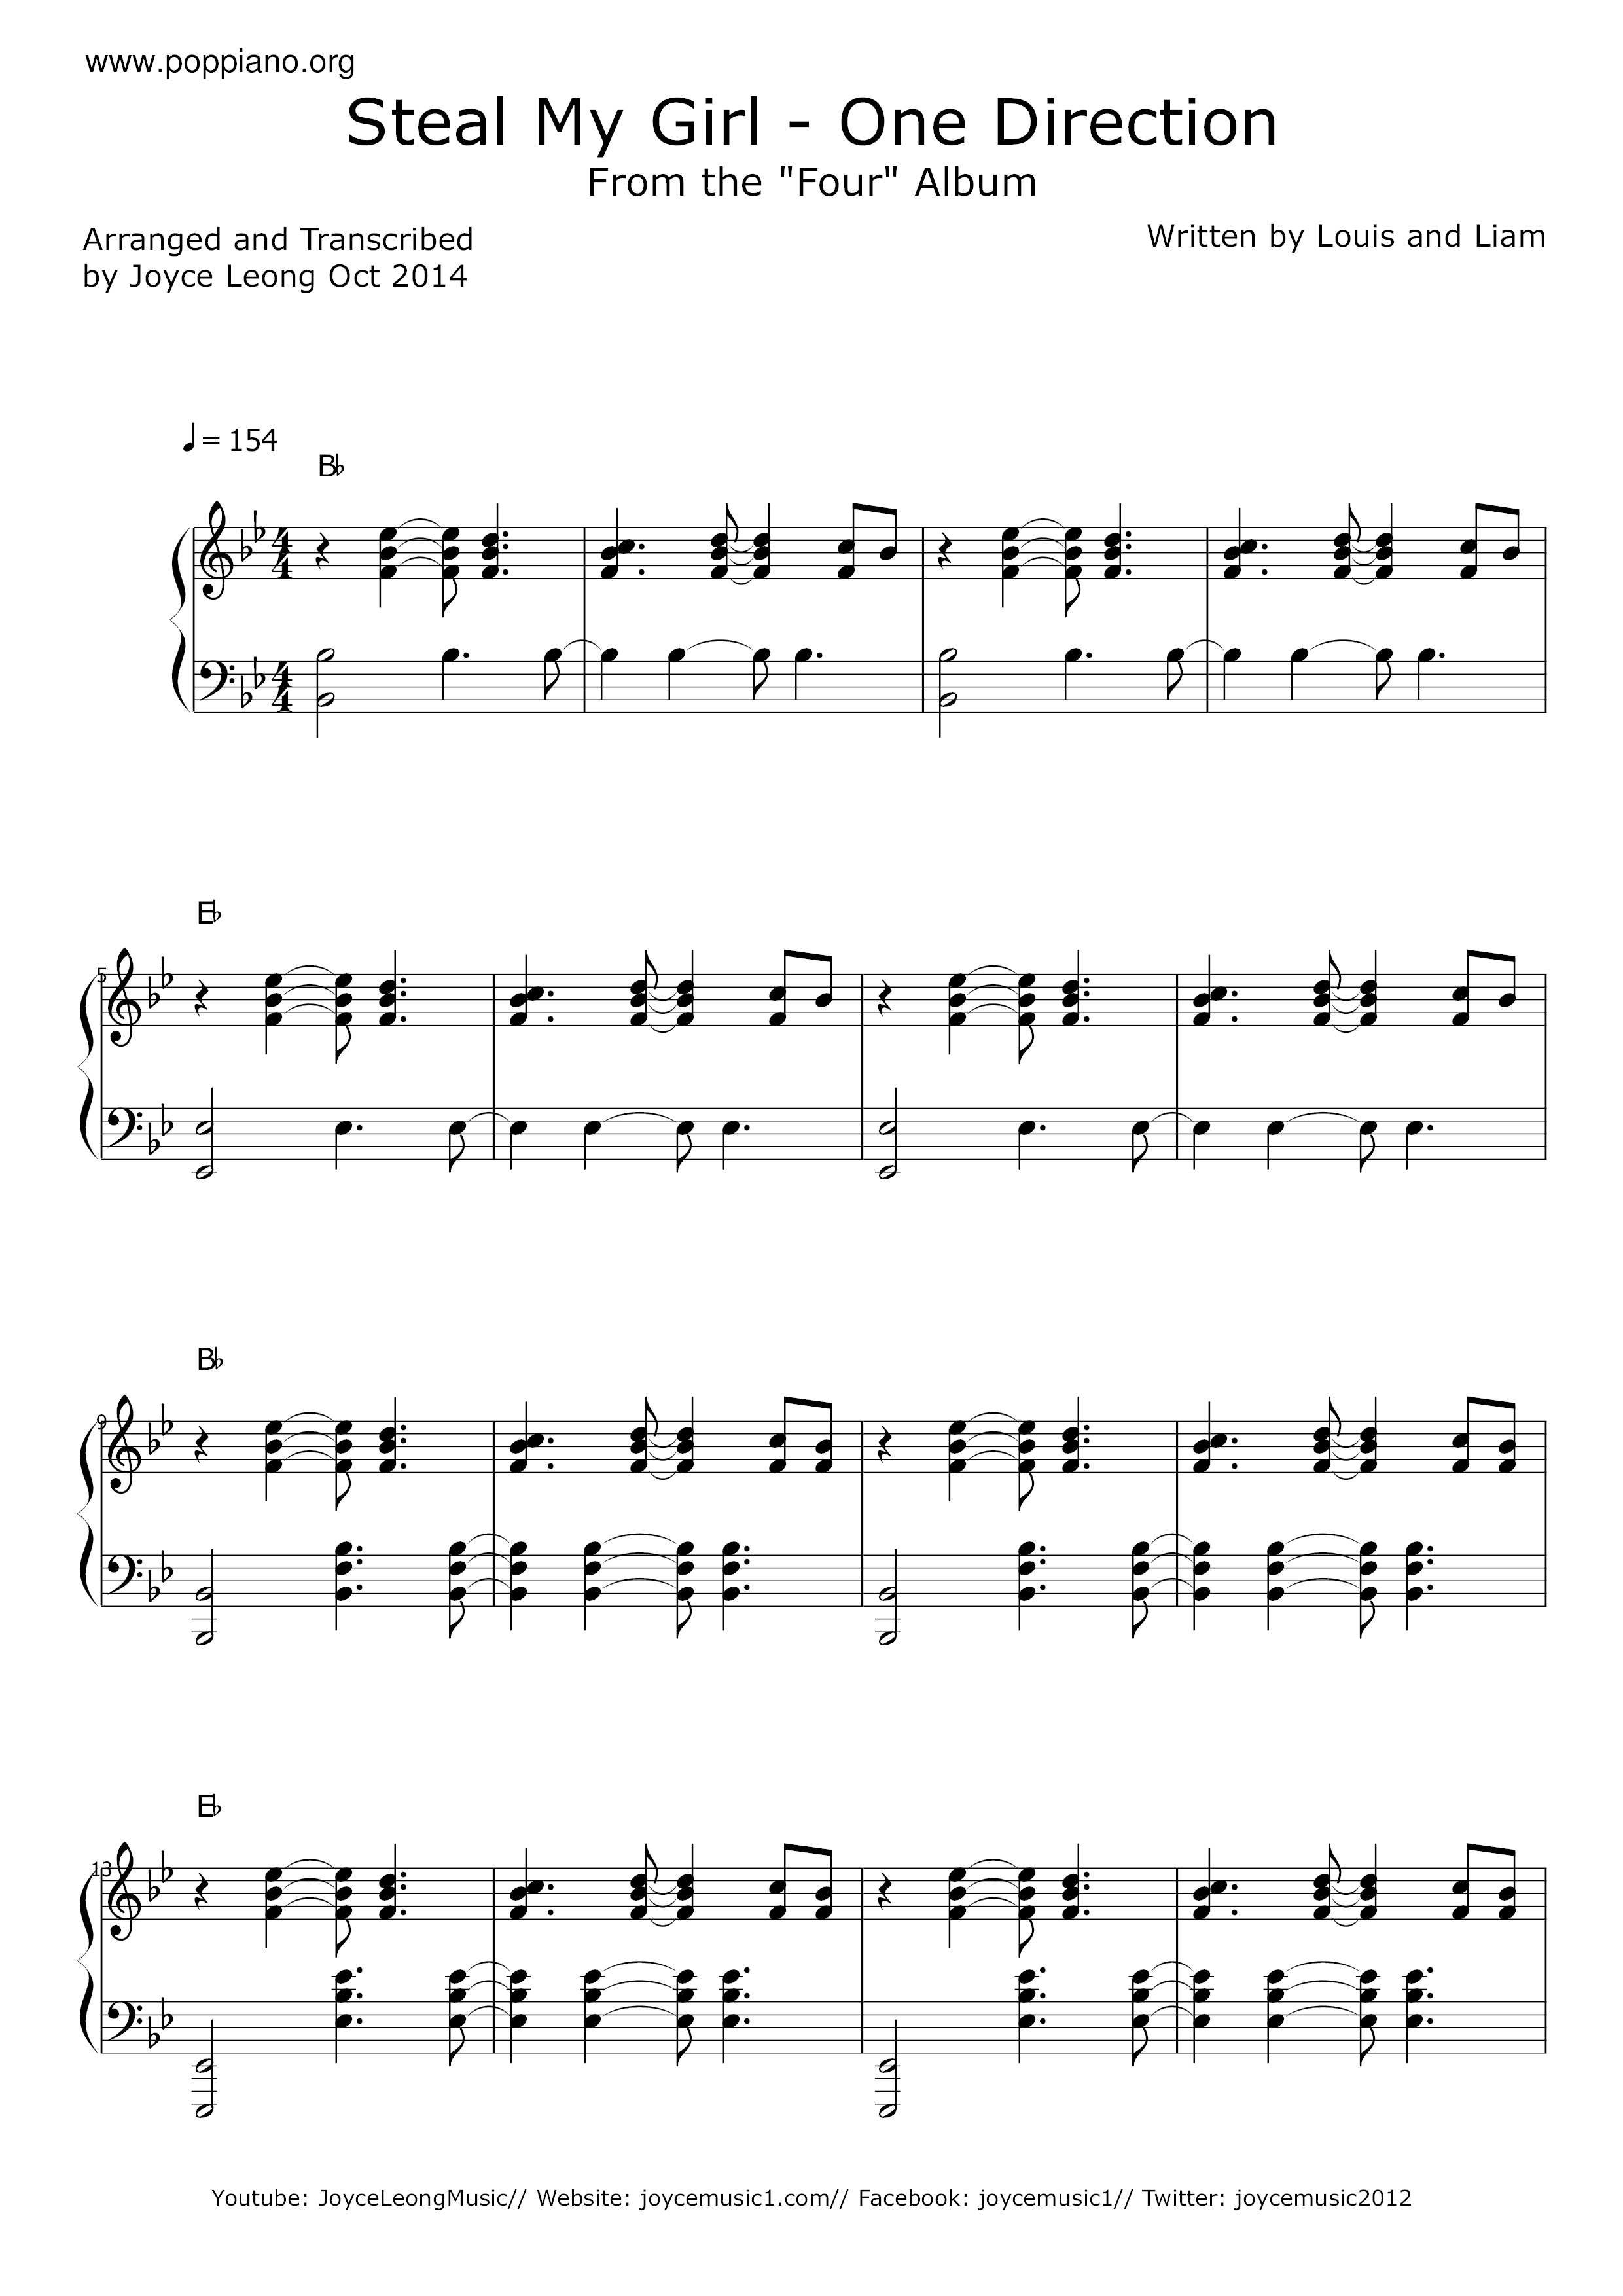 ☆ One Direction-Steal My Girl Sheet Music pdf, - Free Score